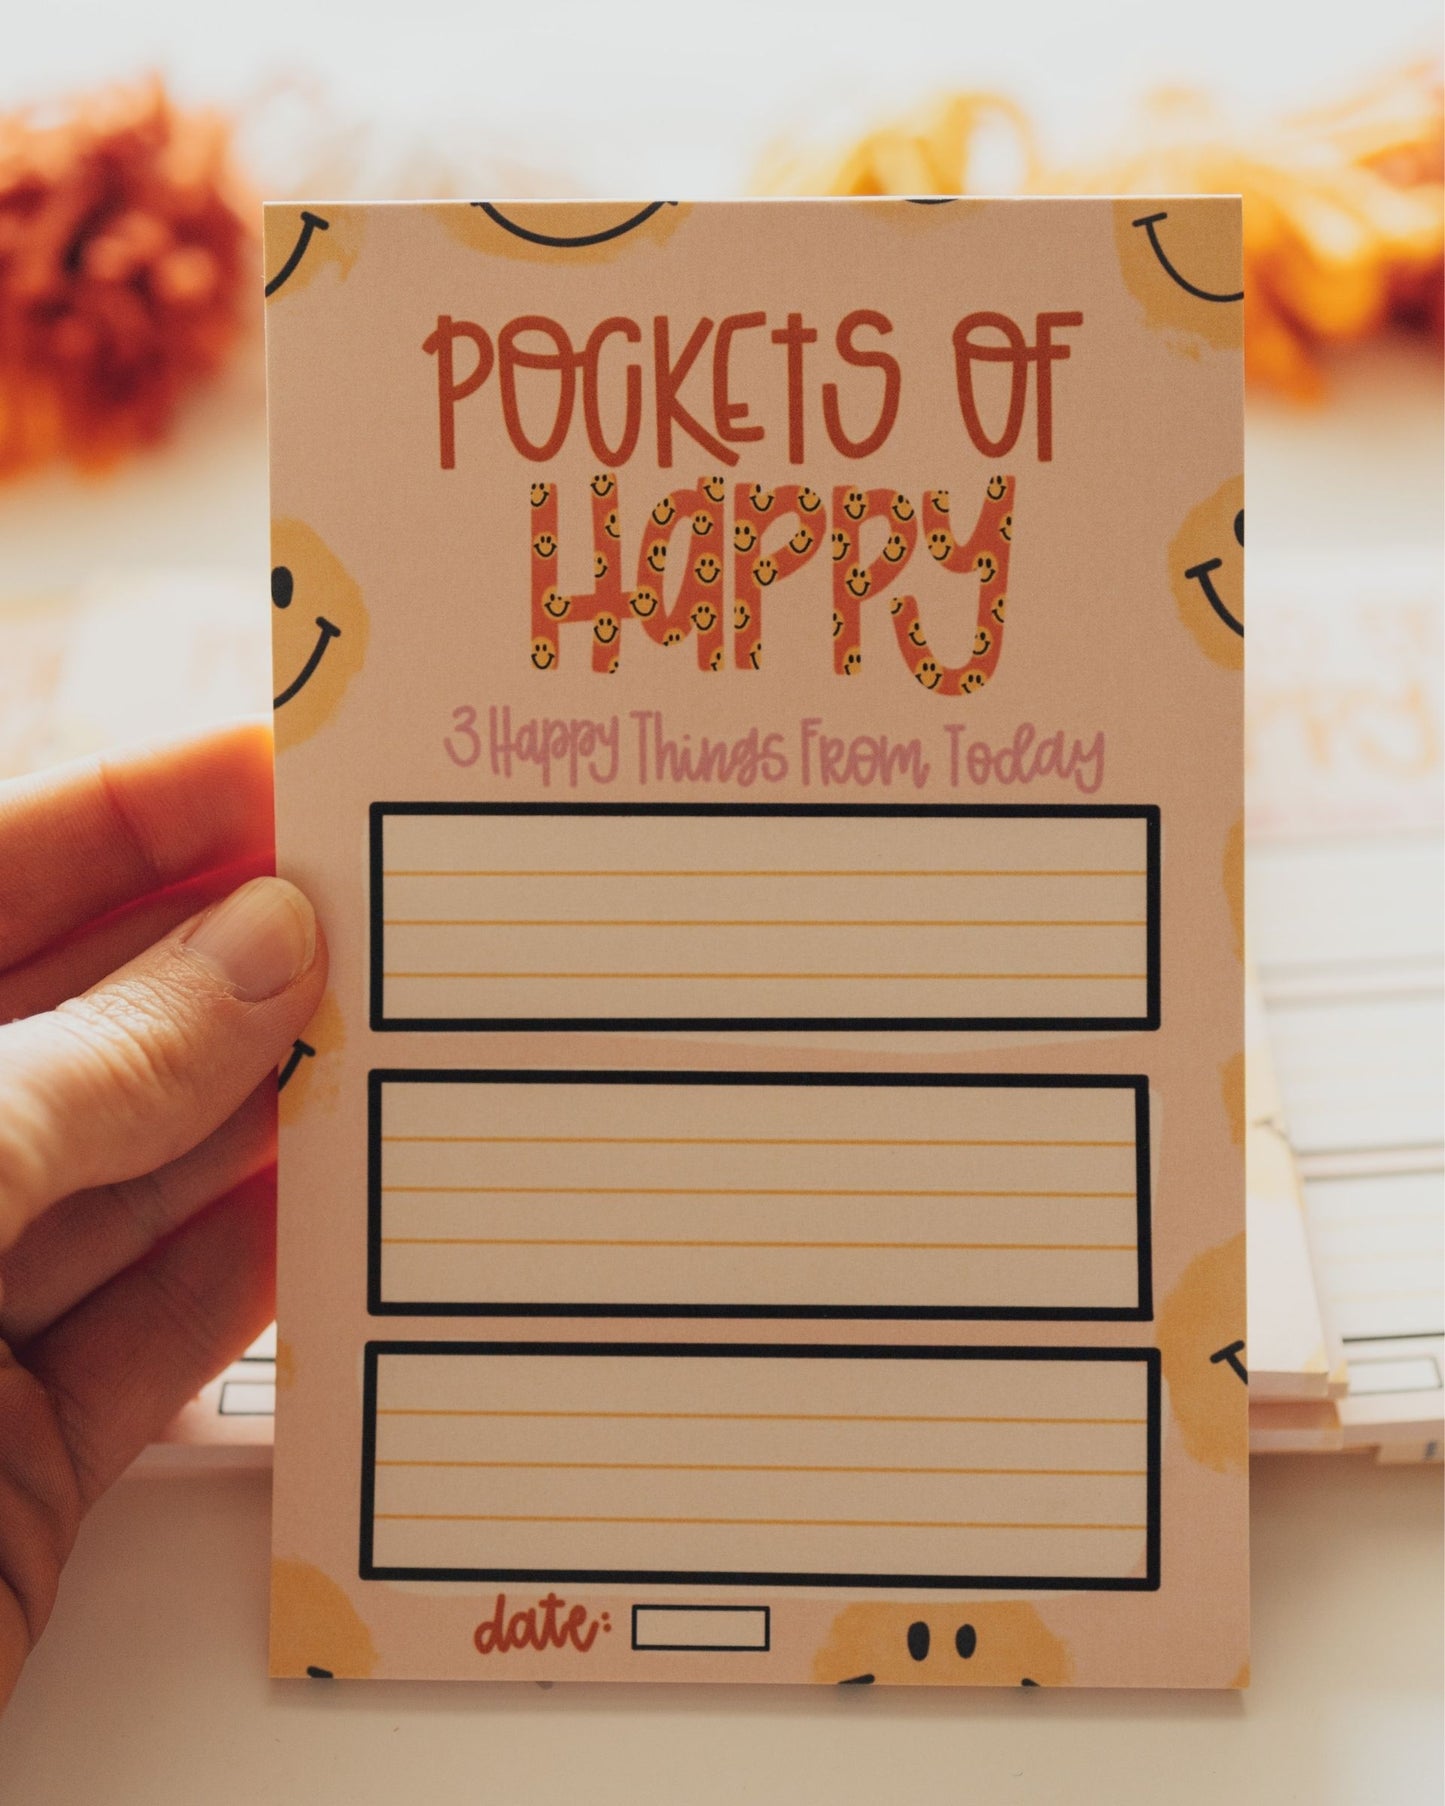 Pockets of happy recycled Notepad.